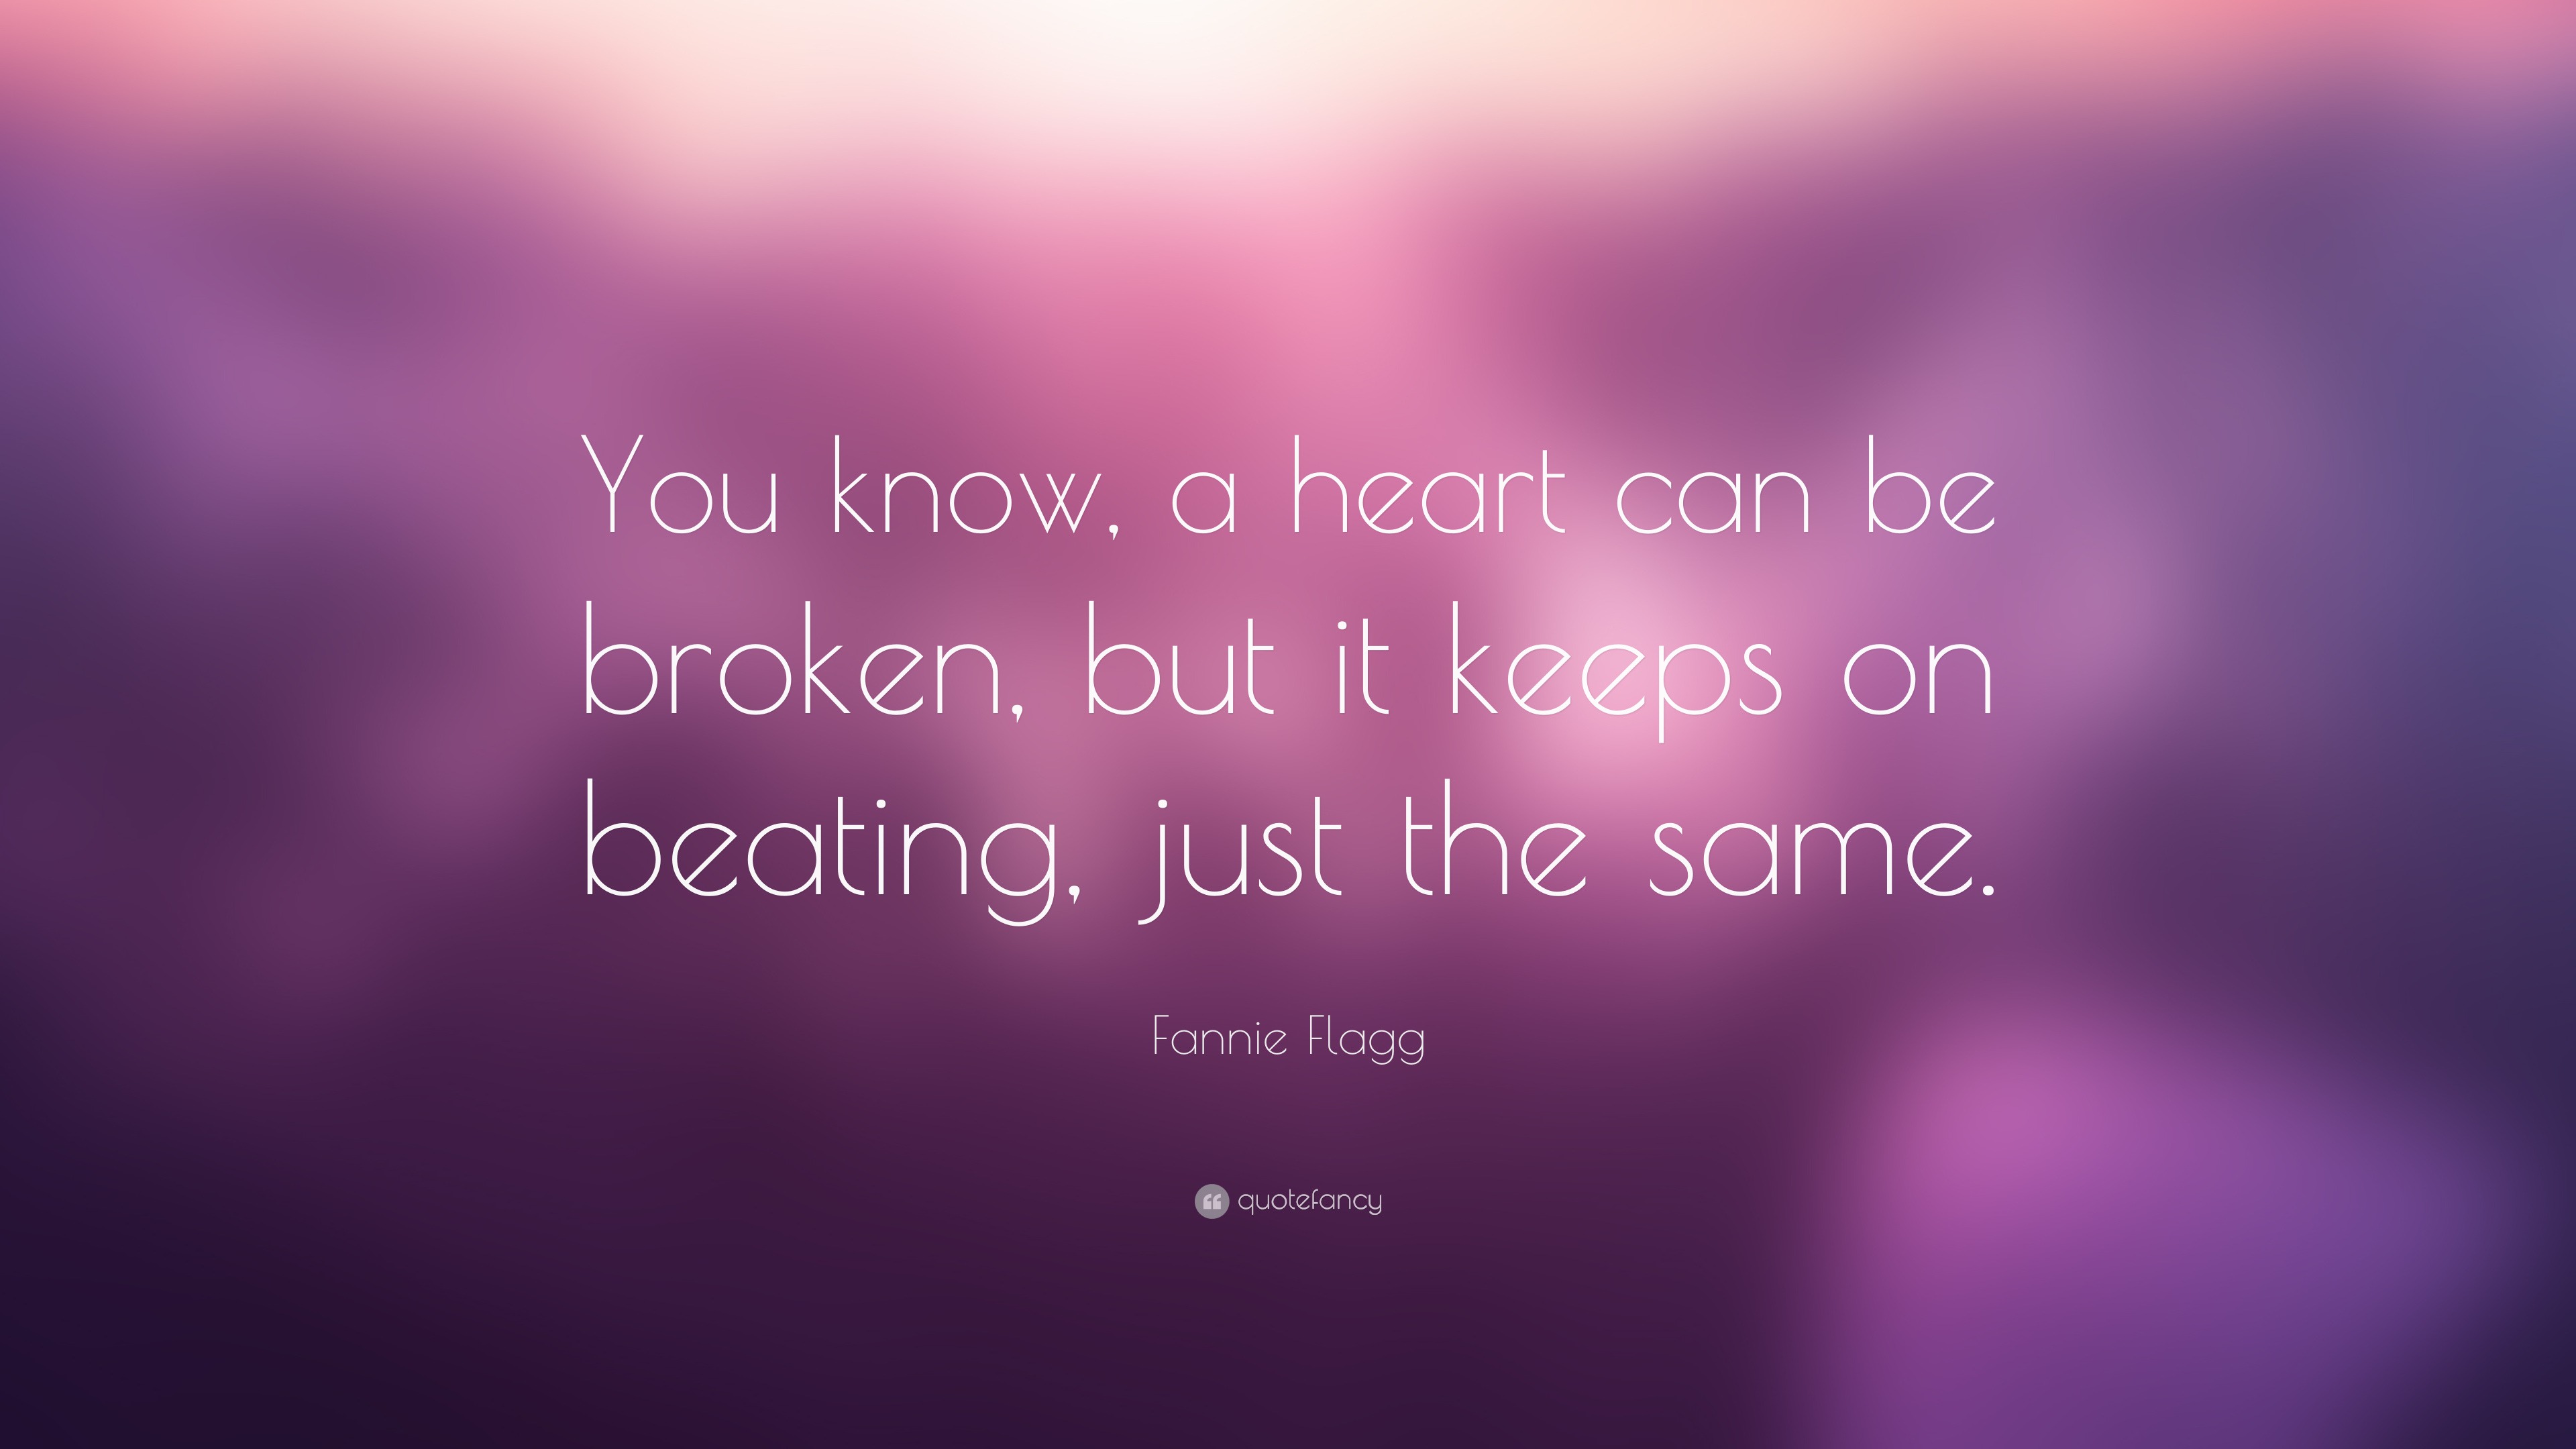 Fannie Flagg Quote: “You know, a heart can be broken, but it keeps on ...